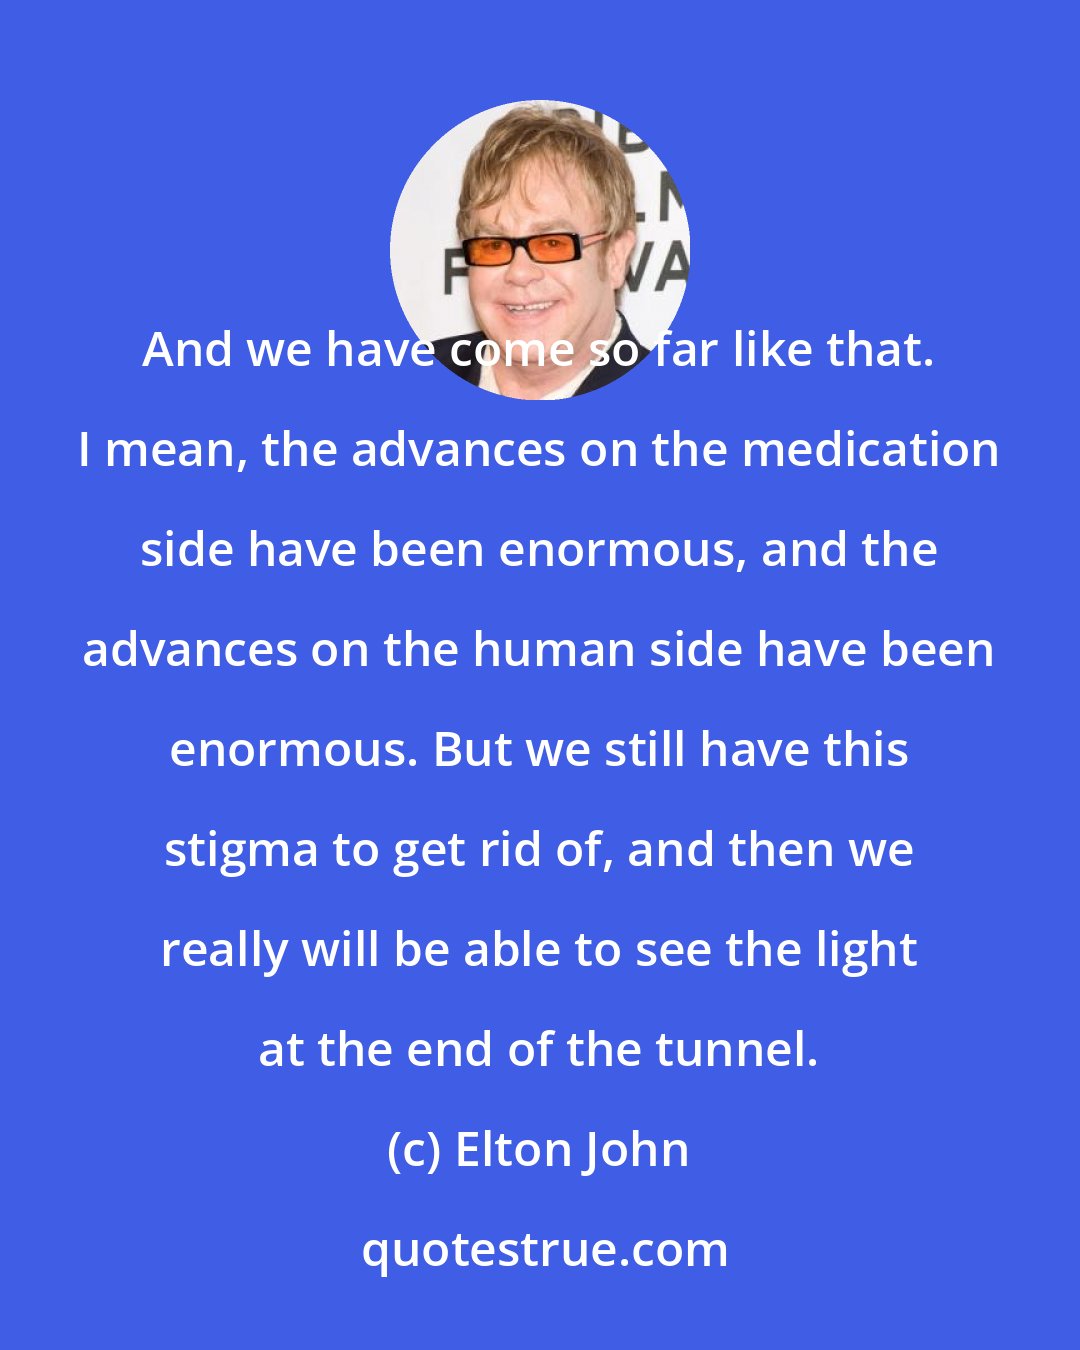 Elton John: And we have come so far like that. I mean, the advances on the medication side have been enormous, and the advances on the human side have been enormous. But we still have this stigma to get rid of, and then we really will be able to see the light at the end of the tunnel.